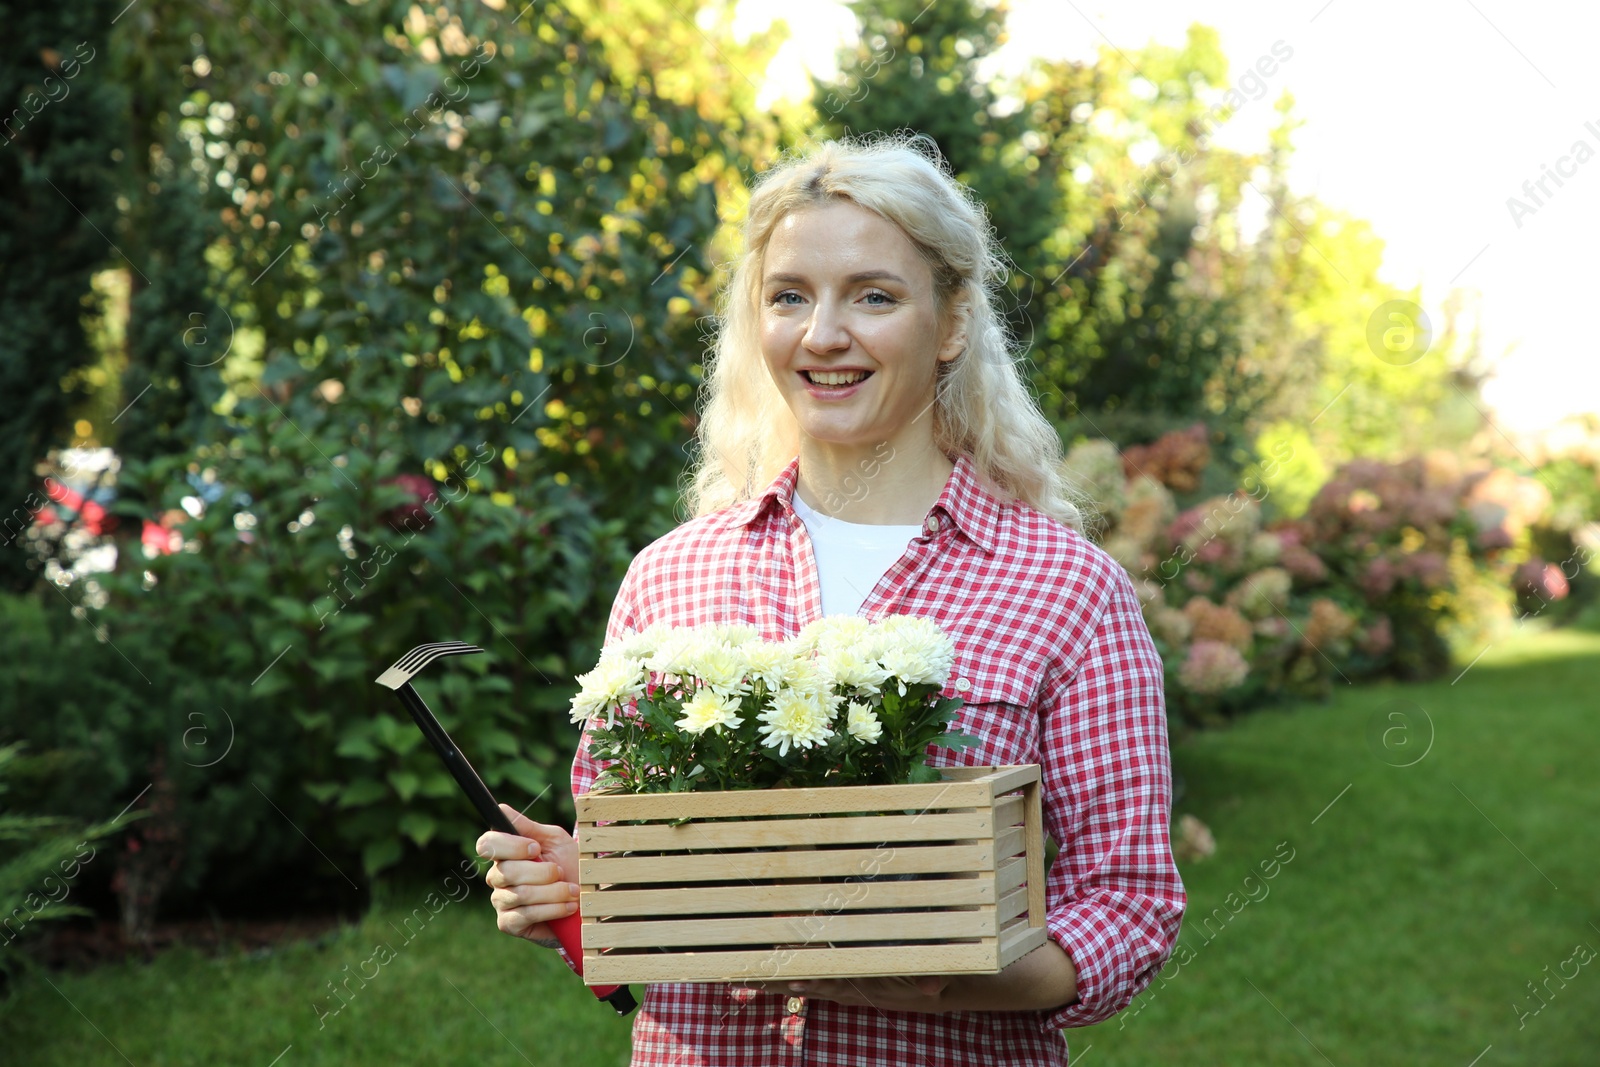 Photo of Woman holding wooden crate with chrysanthemum flowers and gardening rake outdoors